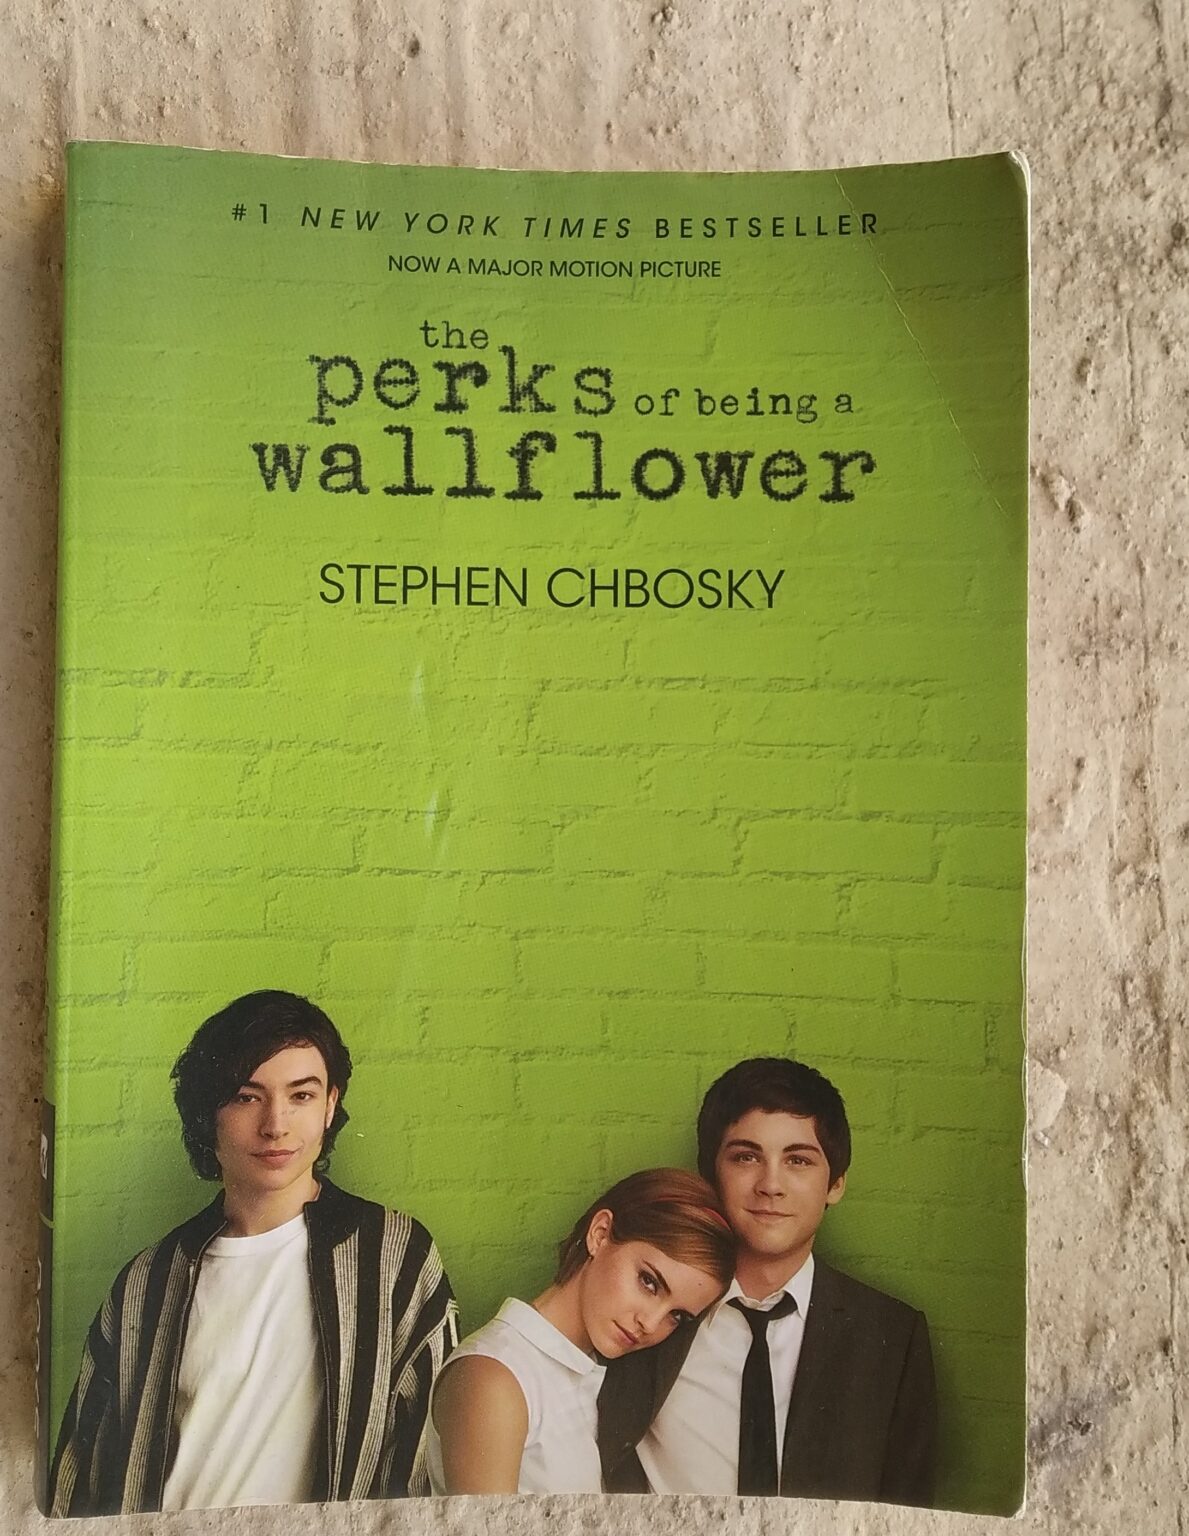 the perks of being a wallflower novel by stephen chbosky